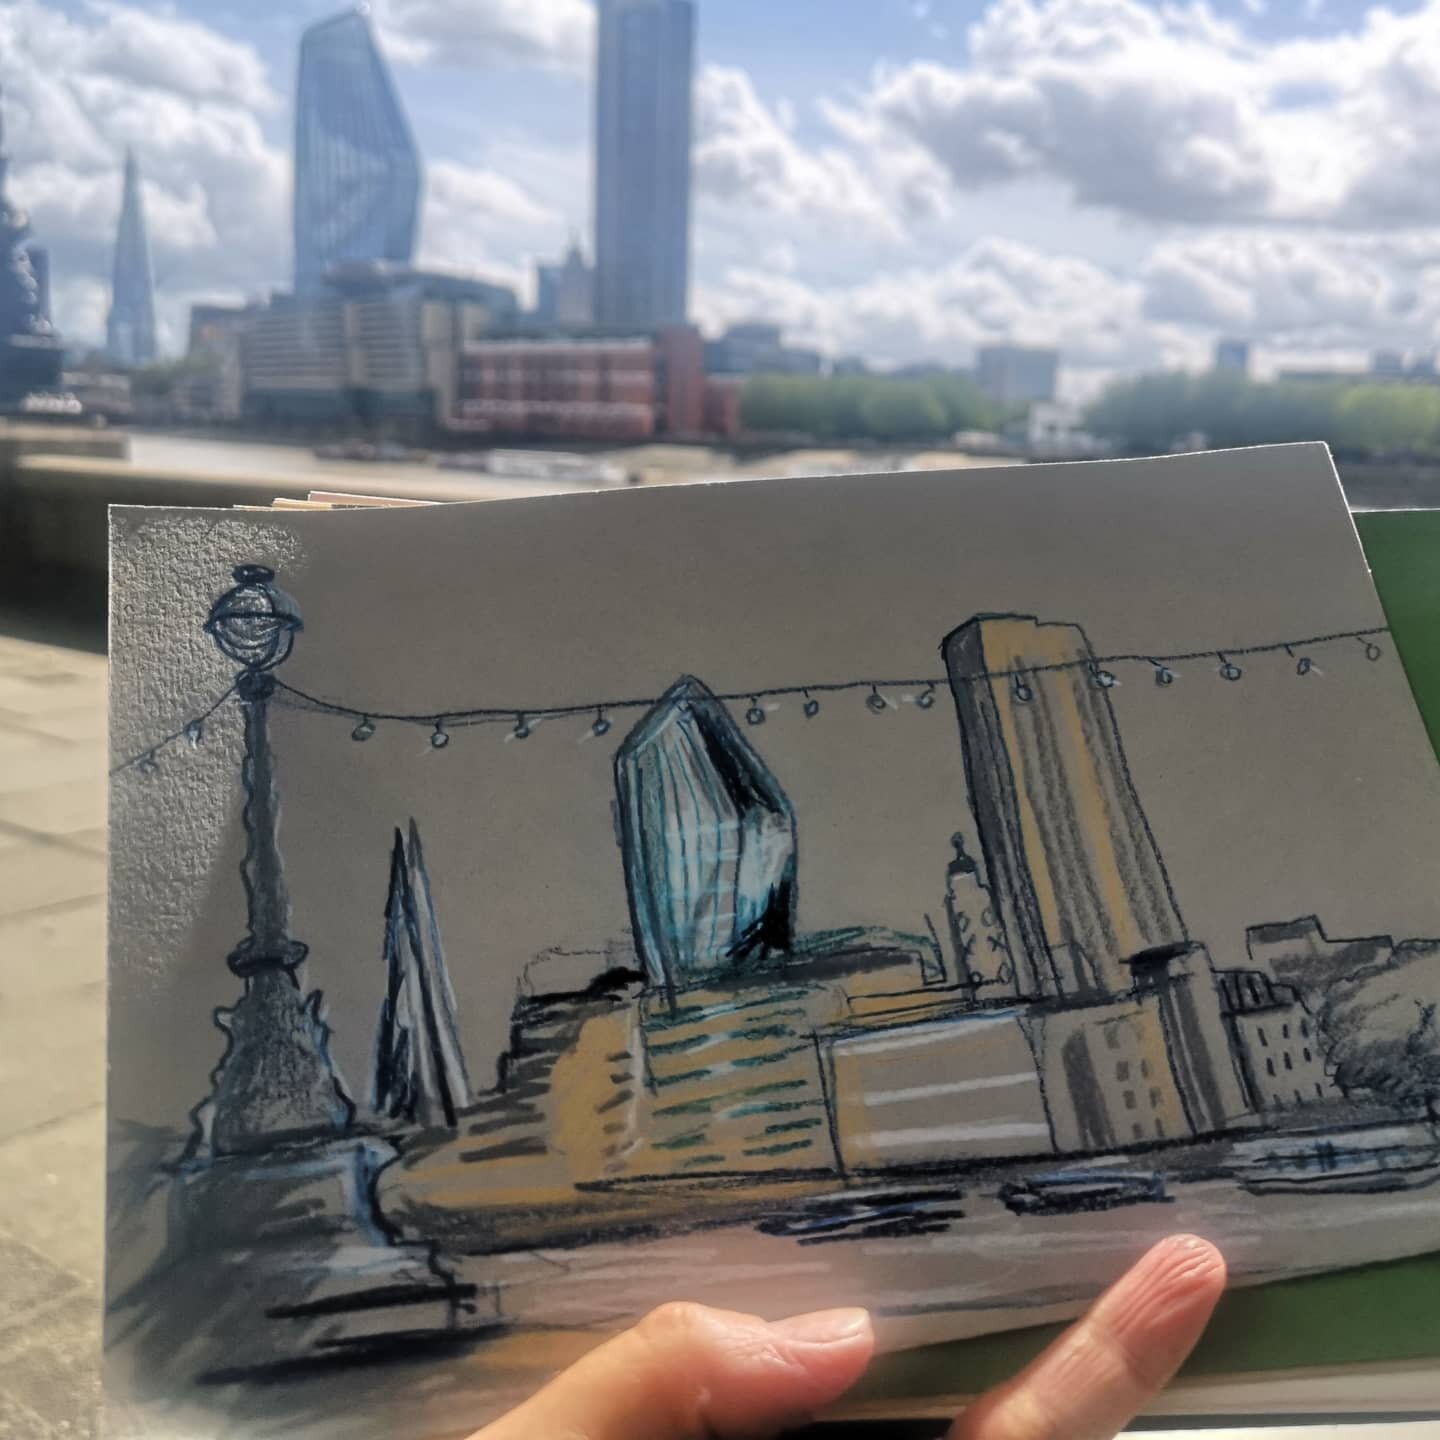 Hello to my estranged city 👋🏻😍I'm remembering how to draw again.
.
.
#hellolondon #brightday #londonweather #londondrawing #london #thamesriver #sketchbook #drawingonlocation #travelsketch #travelsketchbook #pencildrawing #pencilsketch #londonillu